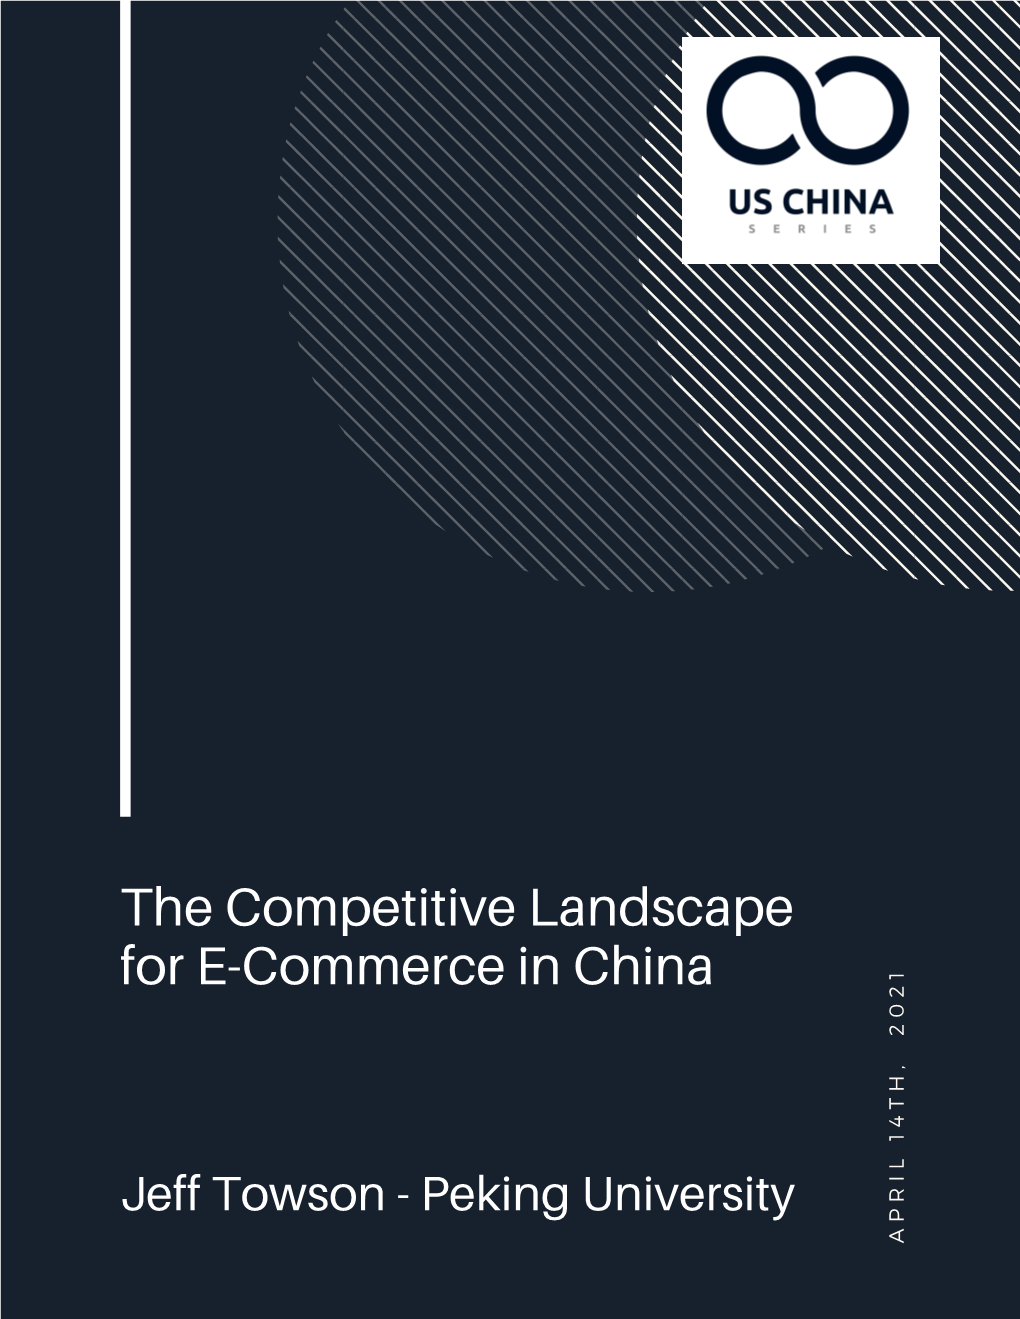 The Competitive Landscape for E-Commerce in China